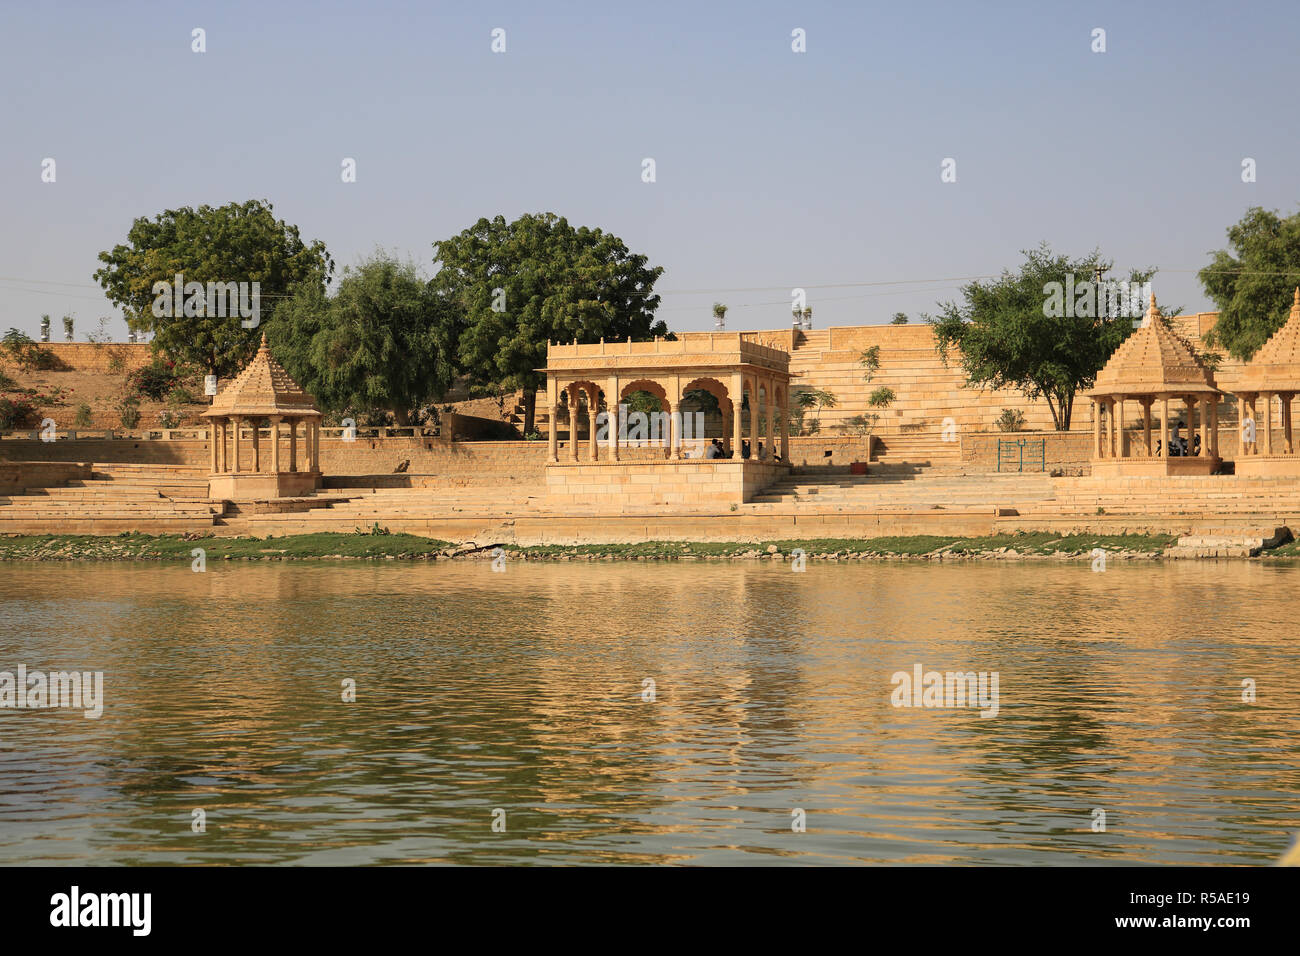 A man-made water reservoir (Gadisar Lake) in Jaisalmer. Constructed by the first ruler of Jaisalmer, Raja Rawal Jaisal, it is surrounded by temples an Stock Photo